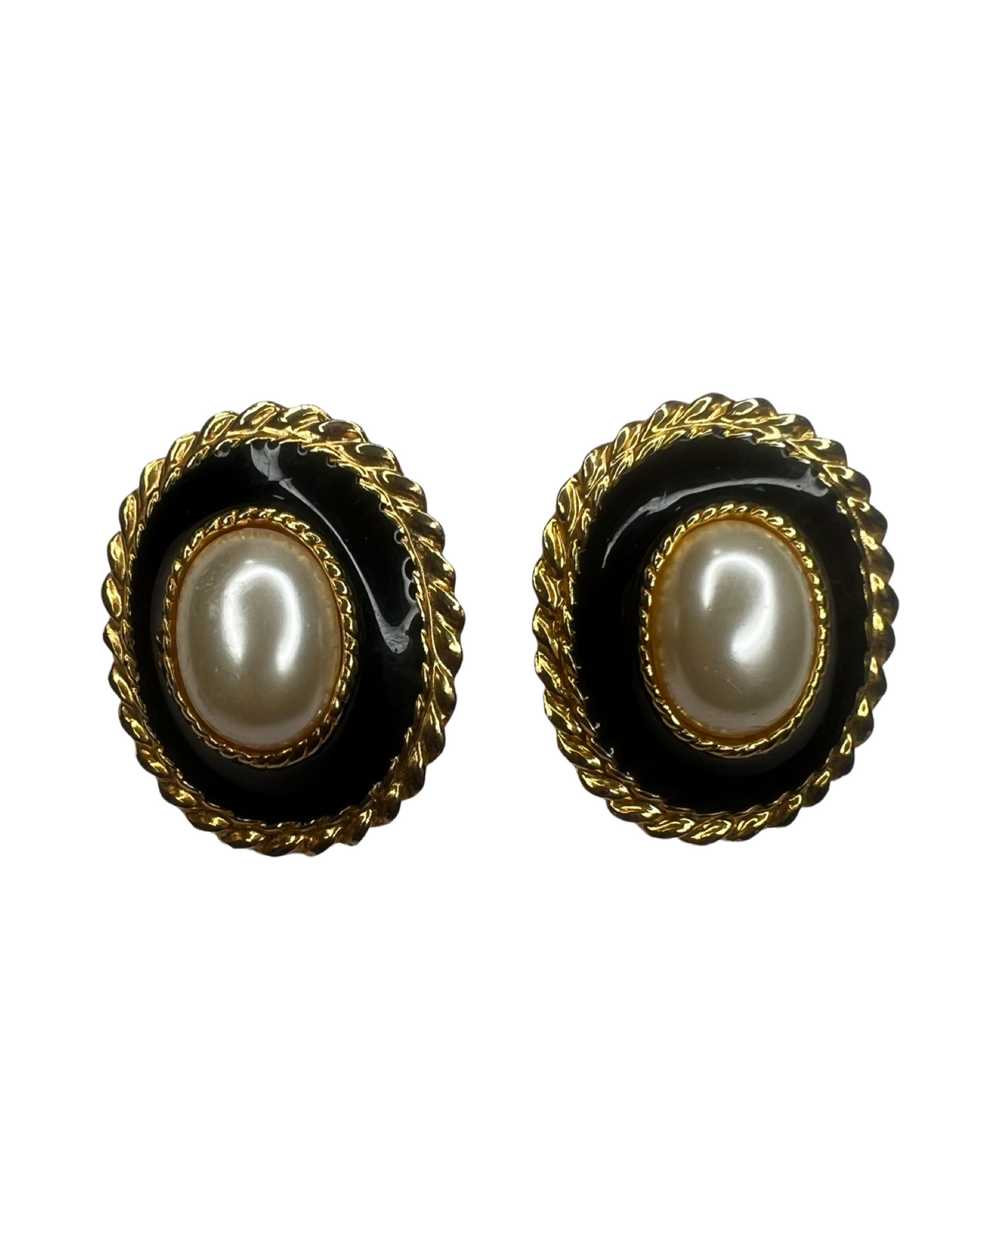 Large Gold, Black, and Faux Pearl Vintage Earrings - image 1